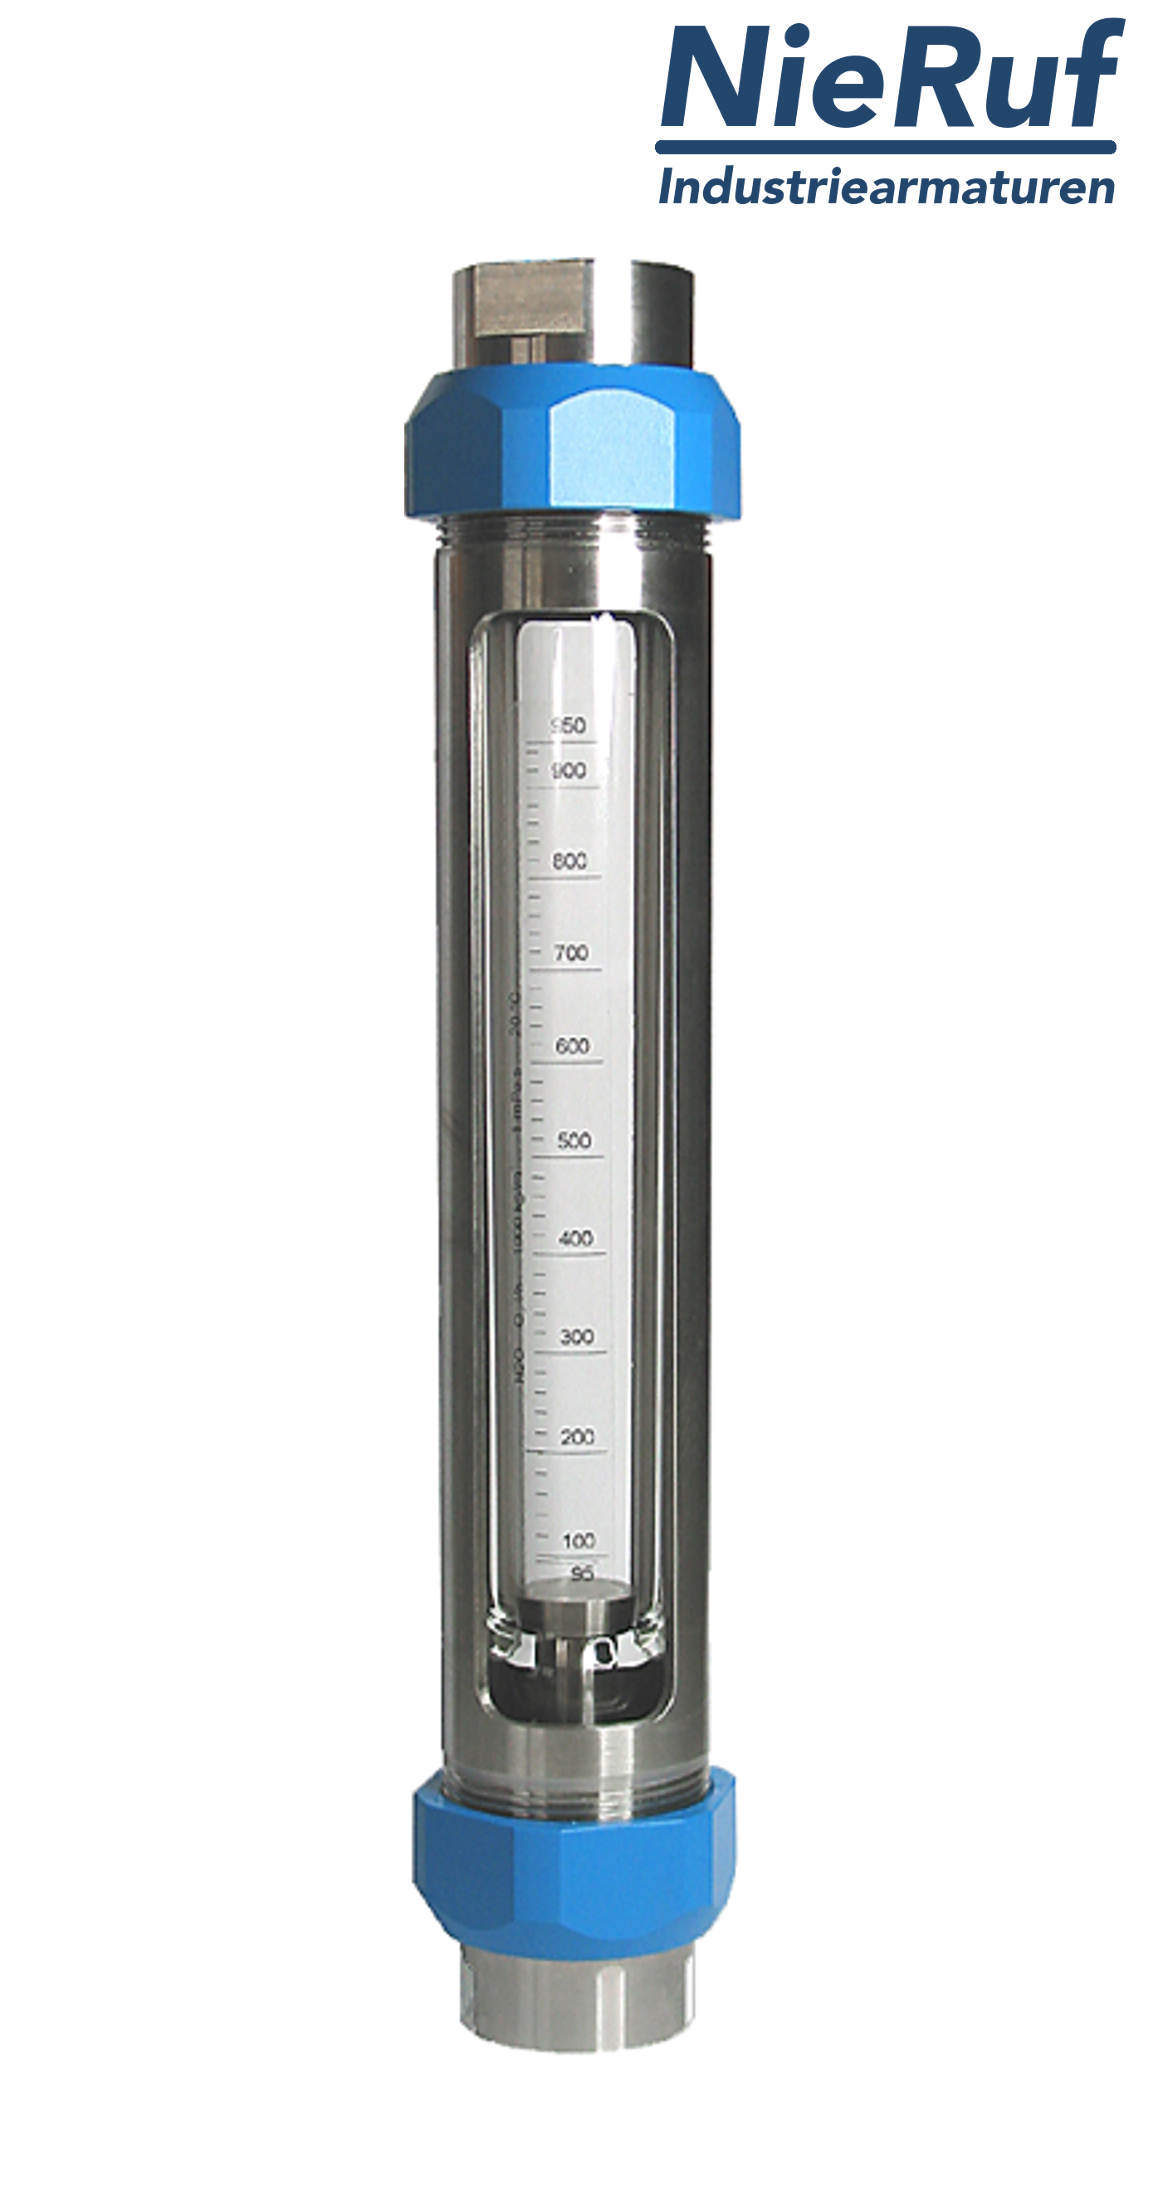 Variable area flowmeter stainless steel + borosilicate 1/2" inch 40.0 - 400.0 l/h water EPDM